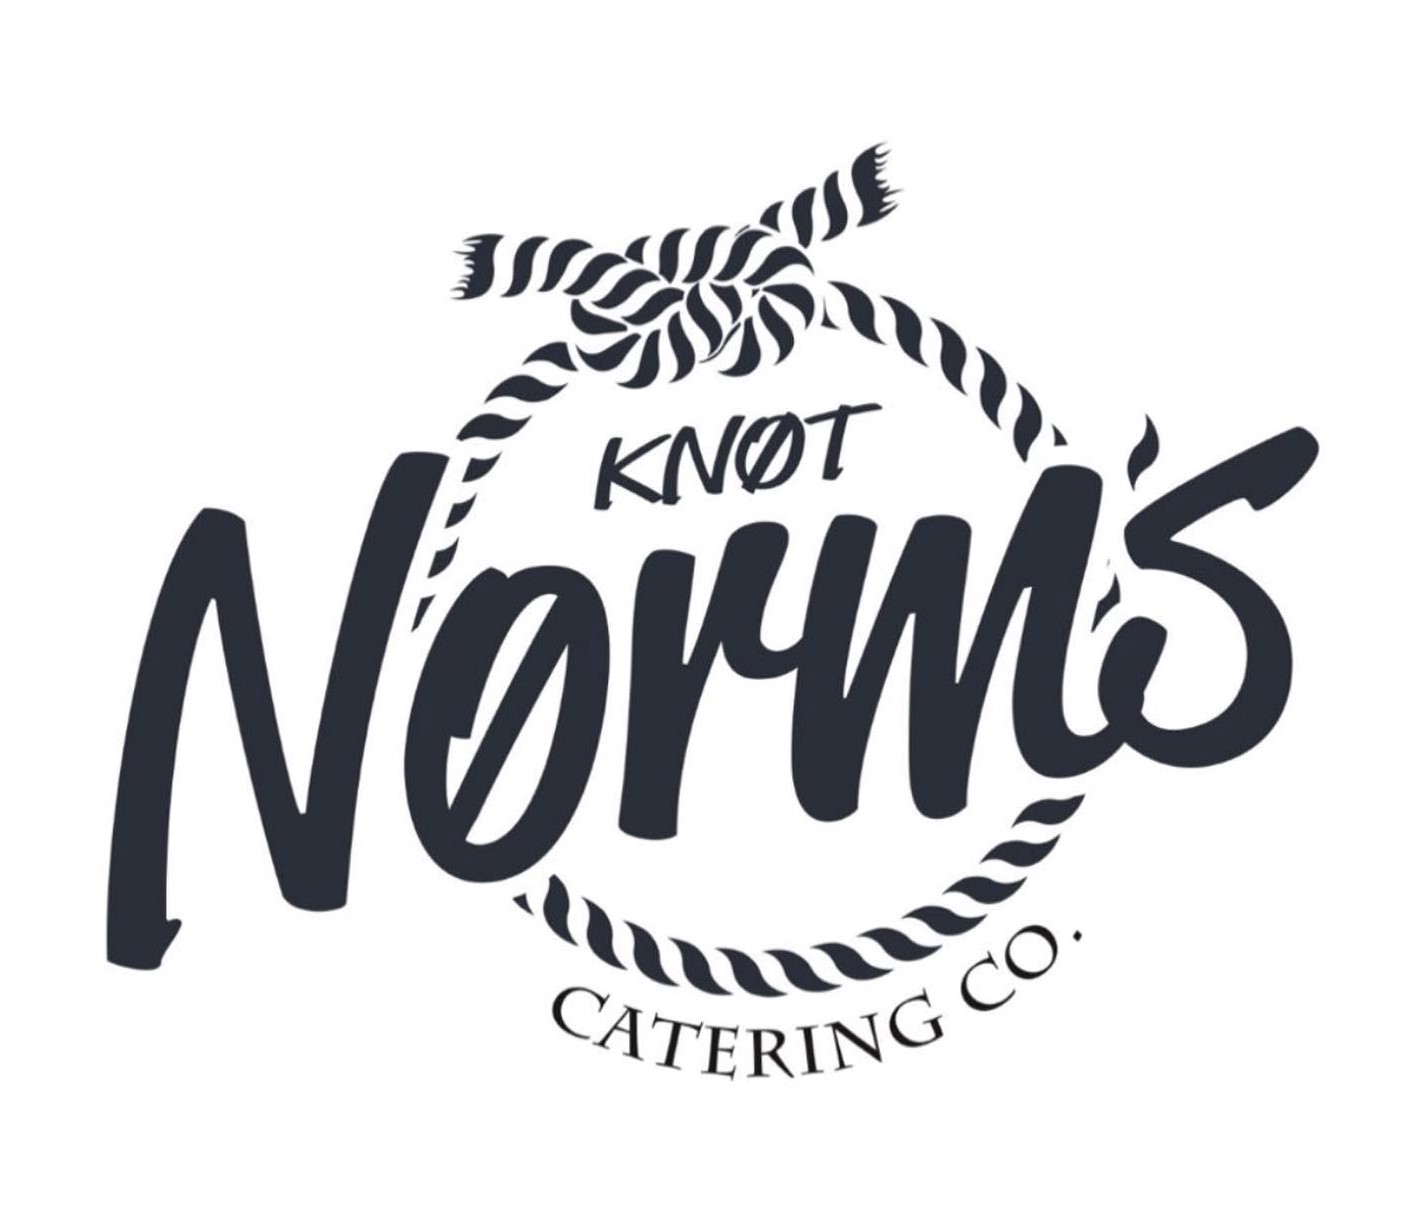 Knot Norms